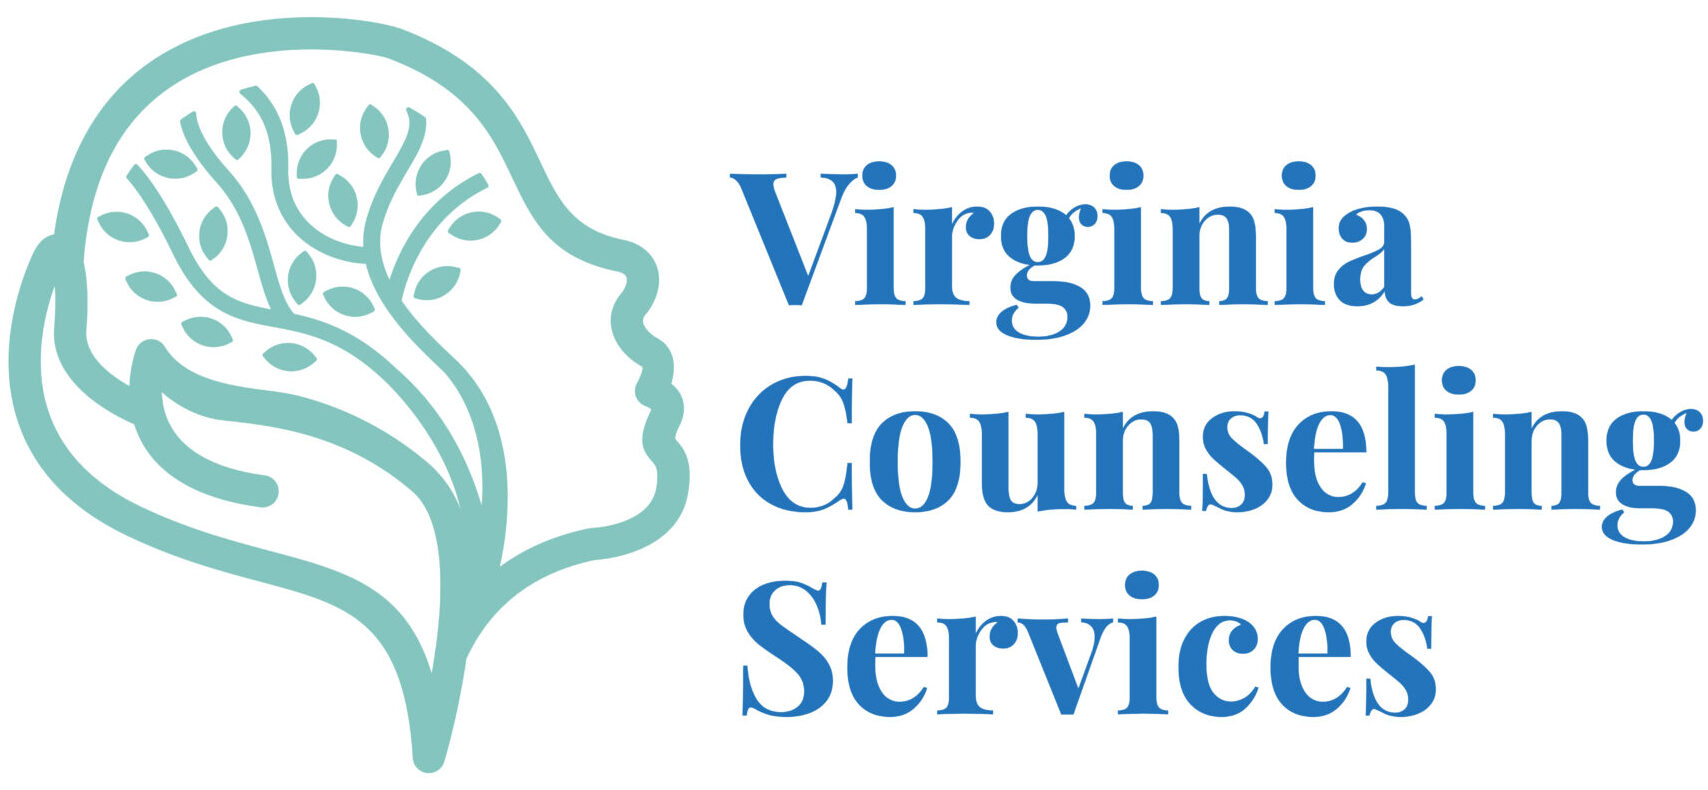 Virginia Counseling Services